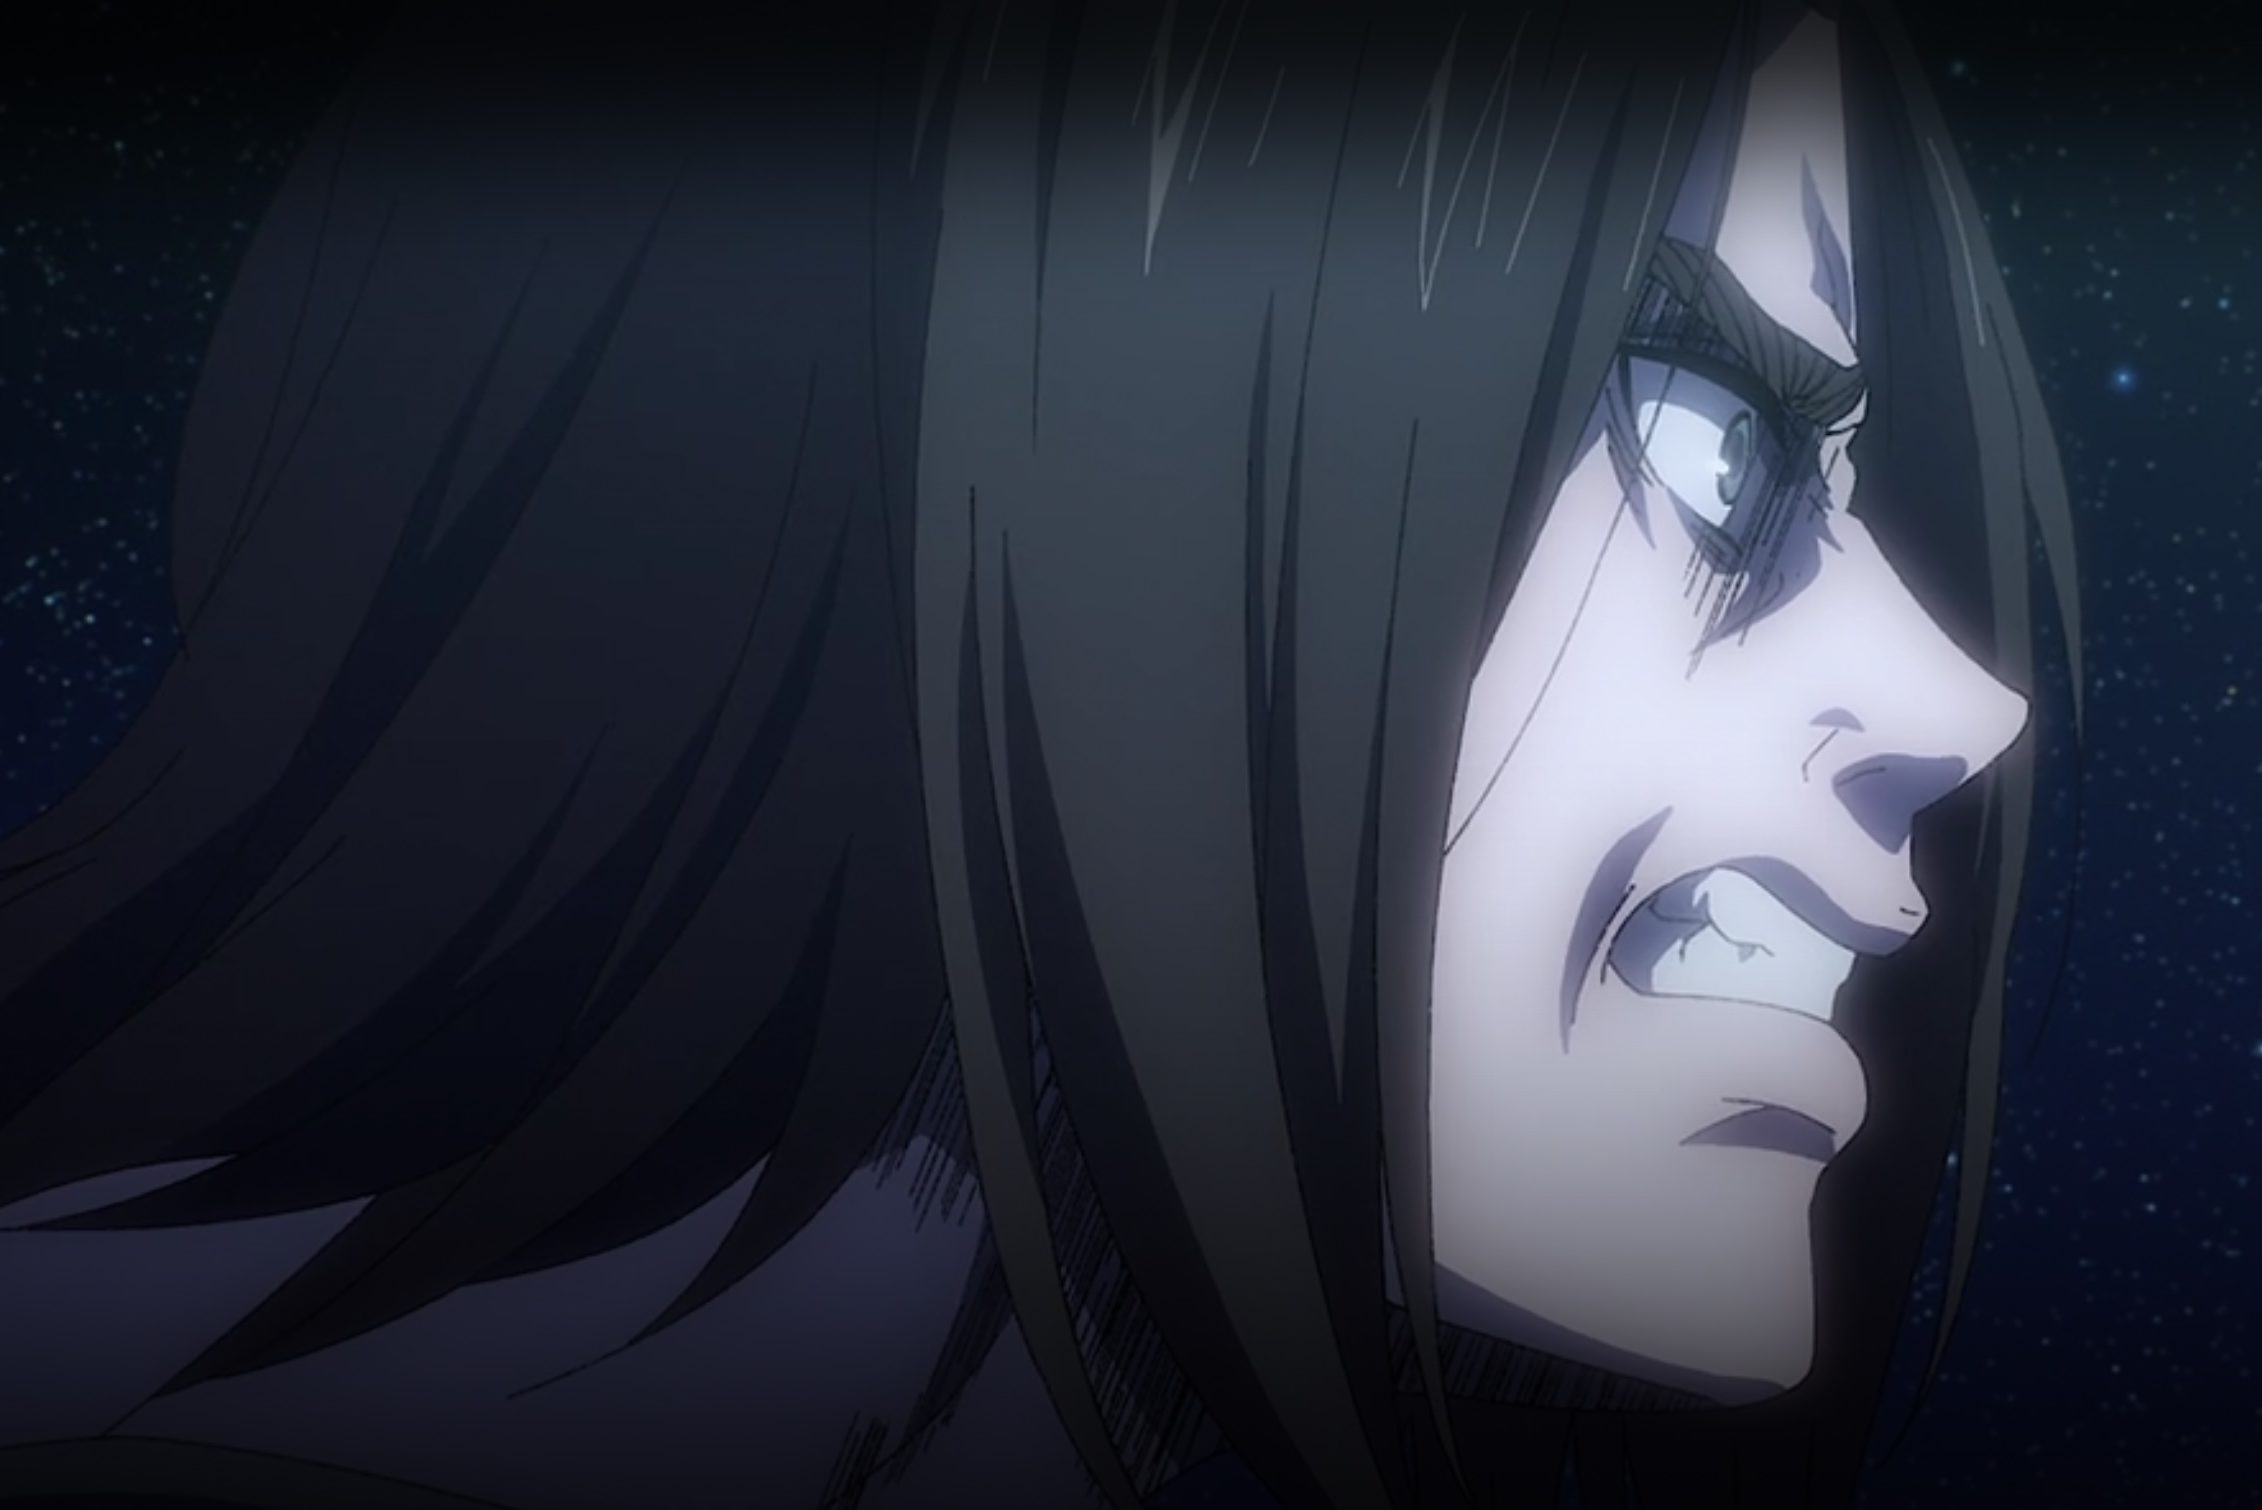 Attack On Titan Season 4 Part 2 Episode 5 Review: From You, 2000